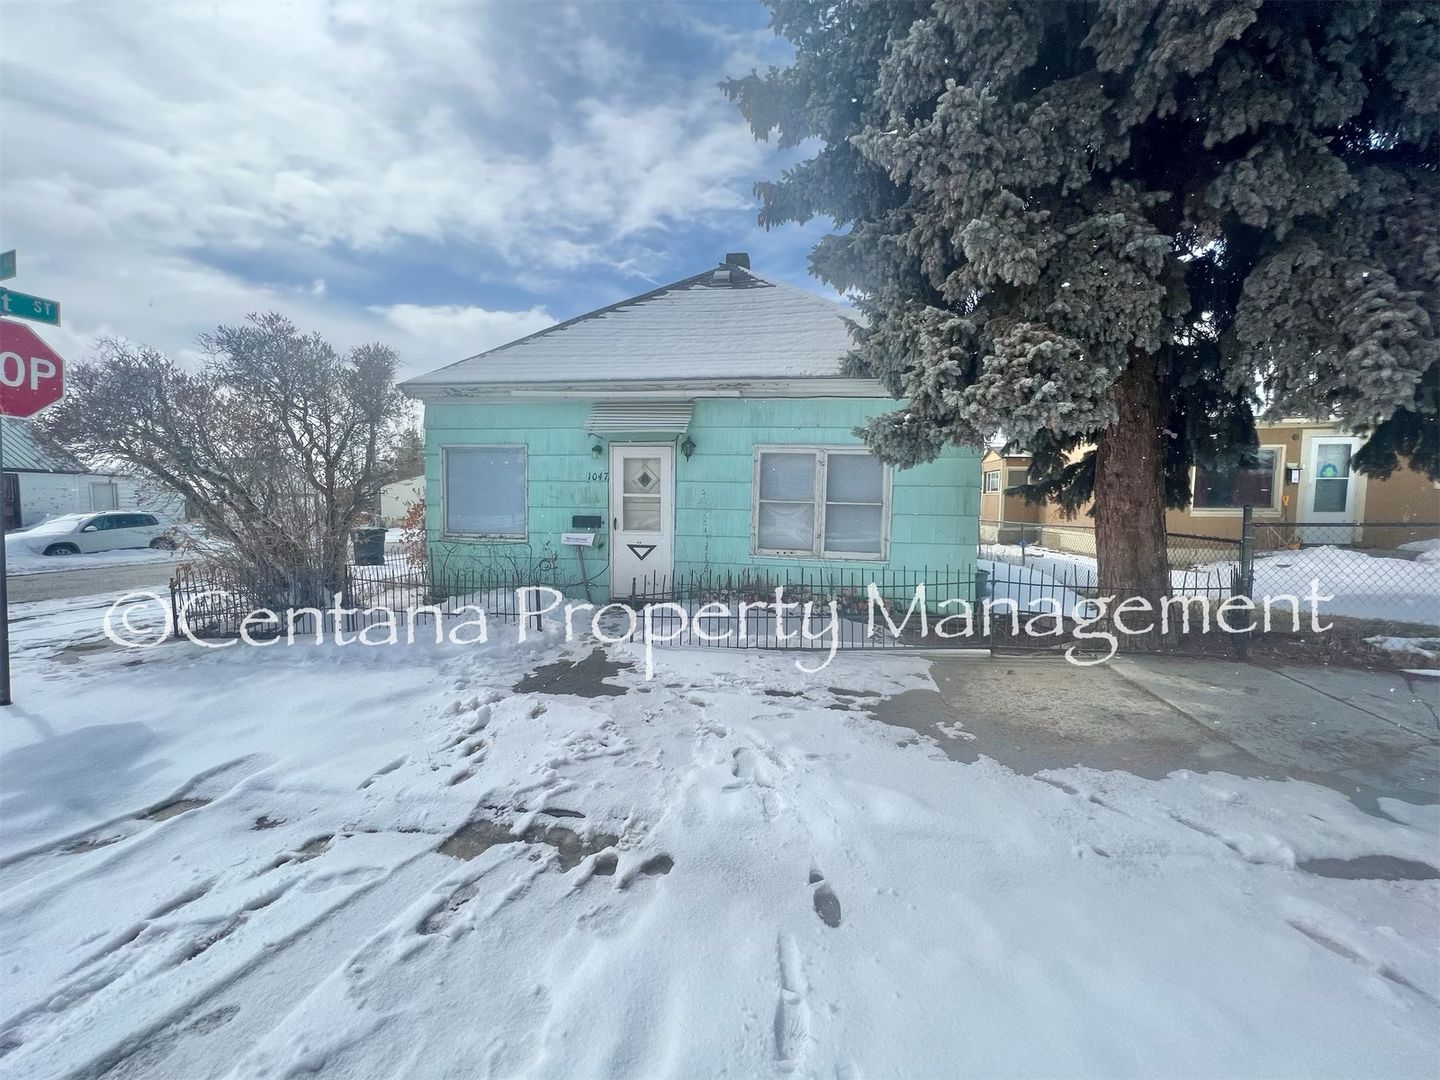 2 bedroom house centrally located and pet friendly!